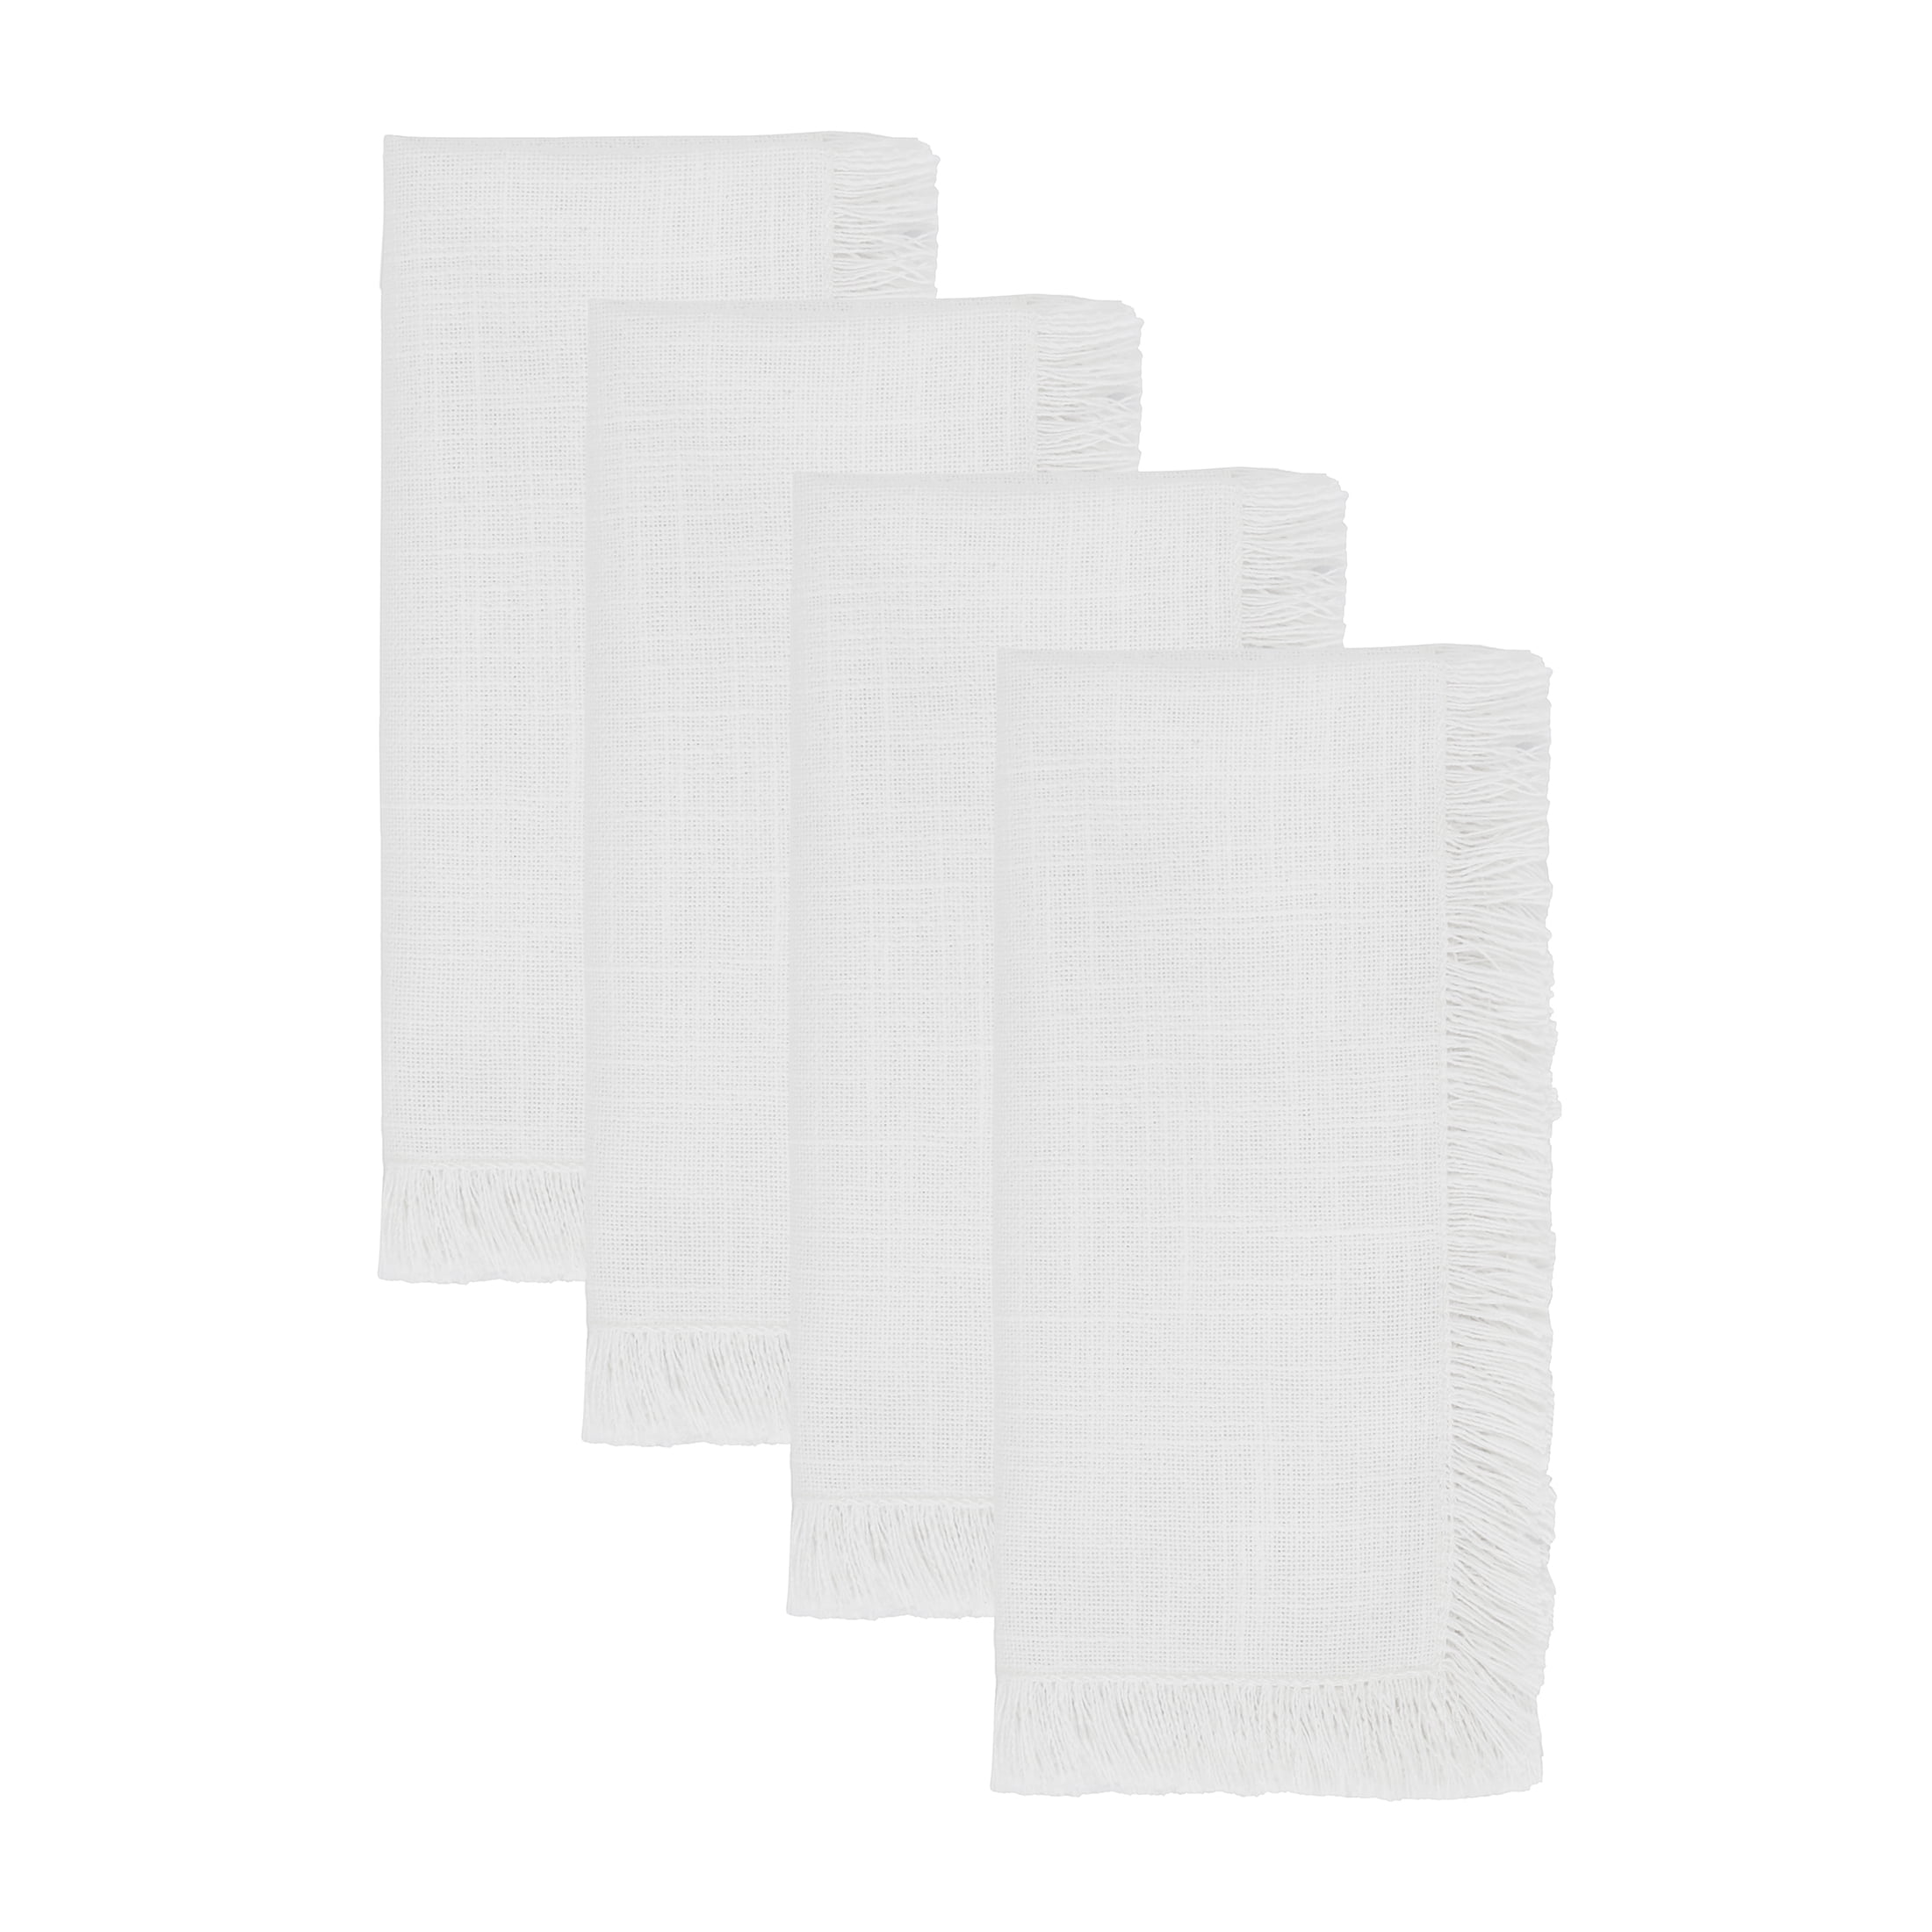 My Texas House Solid Fringe Cloth Dinner Table Napkins, 4 Pieces, White